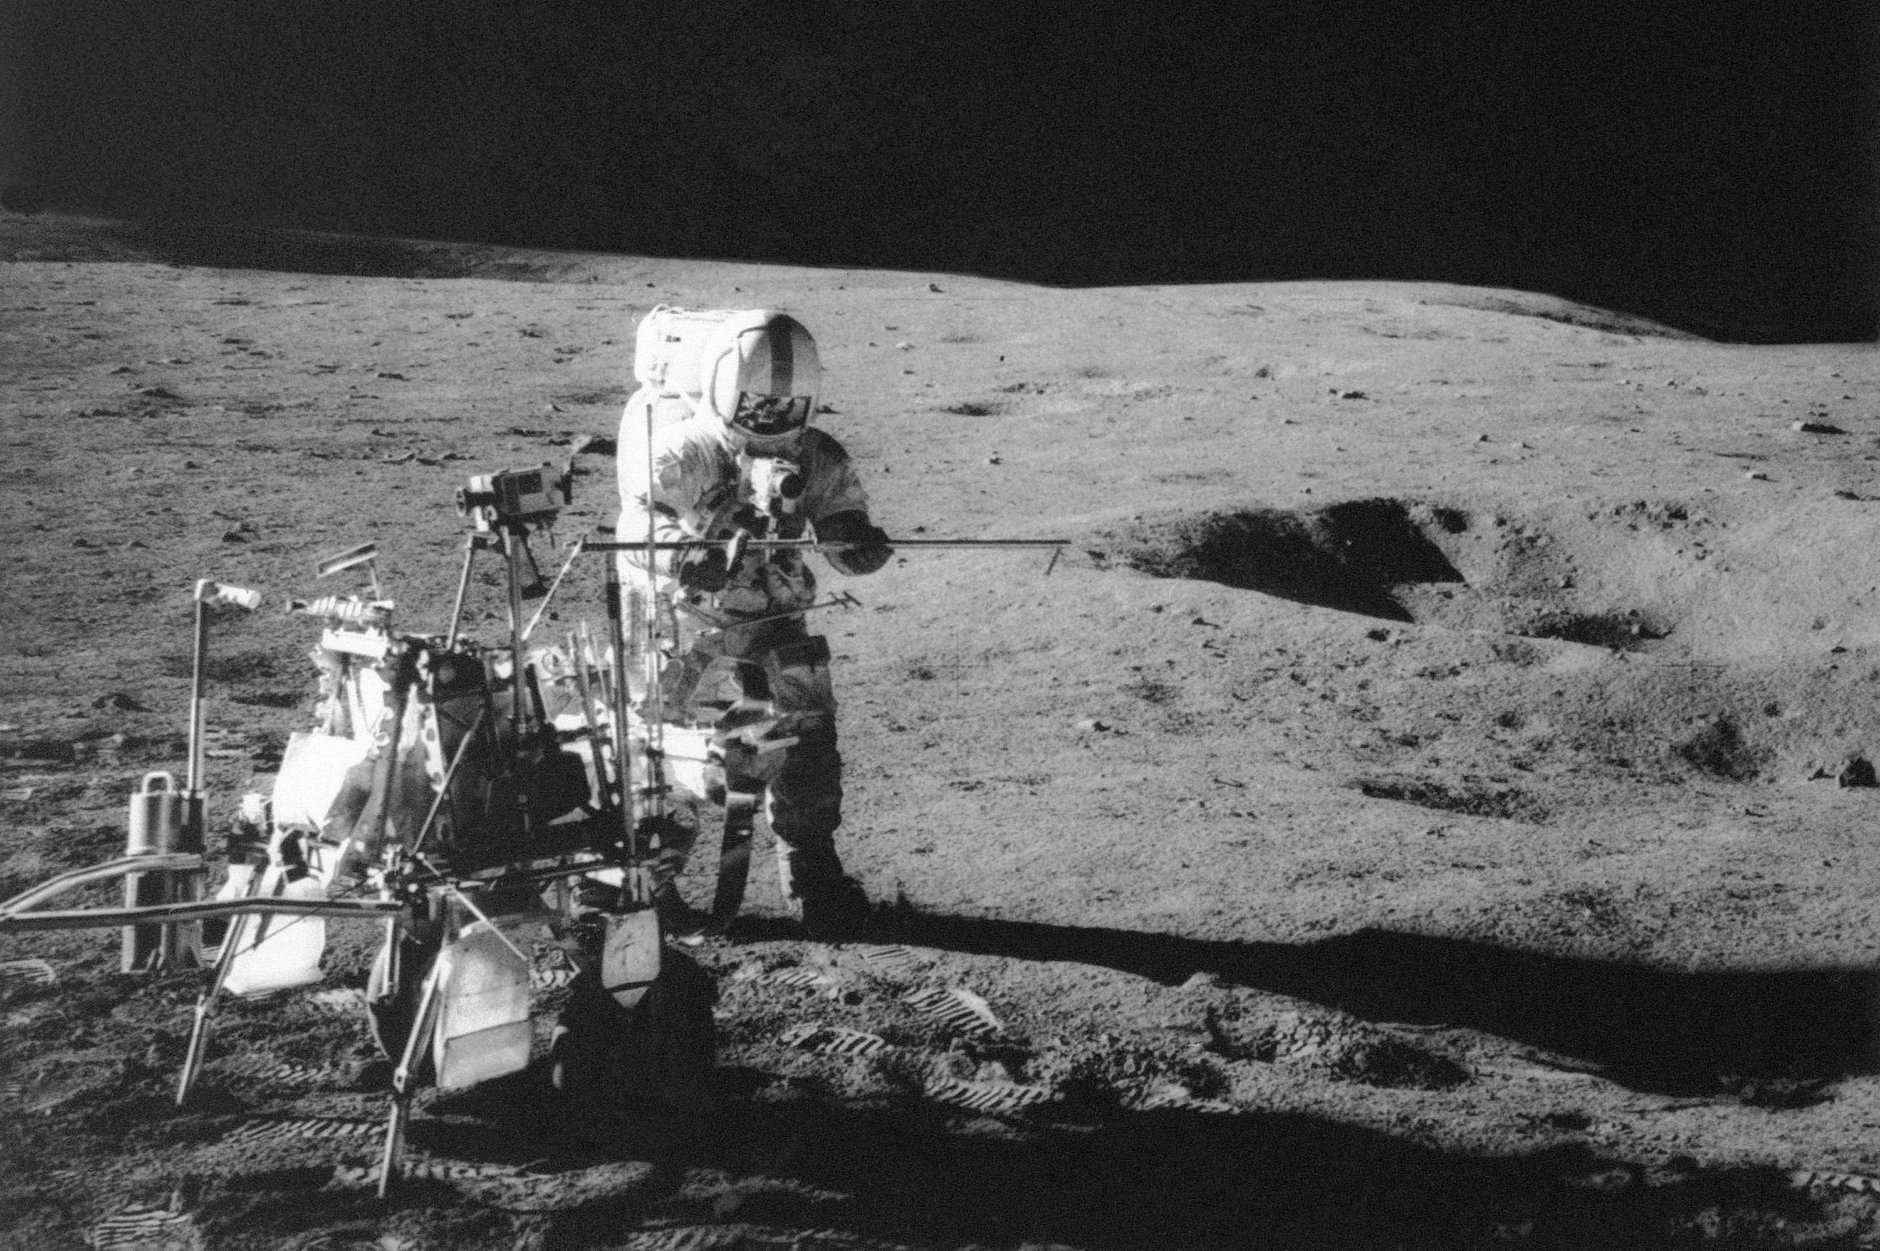 FILE - In this Feb. 13, 1971 file photo, Apollo 14 astronaut Alan B. Shepard Jr. conducts an experiment near a lunar crater, using an instrument from a two-wheeled cart carrying various tools. On Wednesday, Jan. 11, 2017, a California-led research team reported that the moon formed within 60 million years of the birth of the solar system. Previous estimates ranged within 100 million years, all the way out to 200 million years of the solar system’s creation. (NASA via AP)